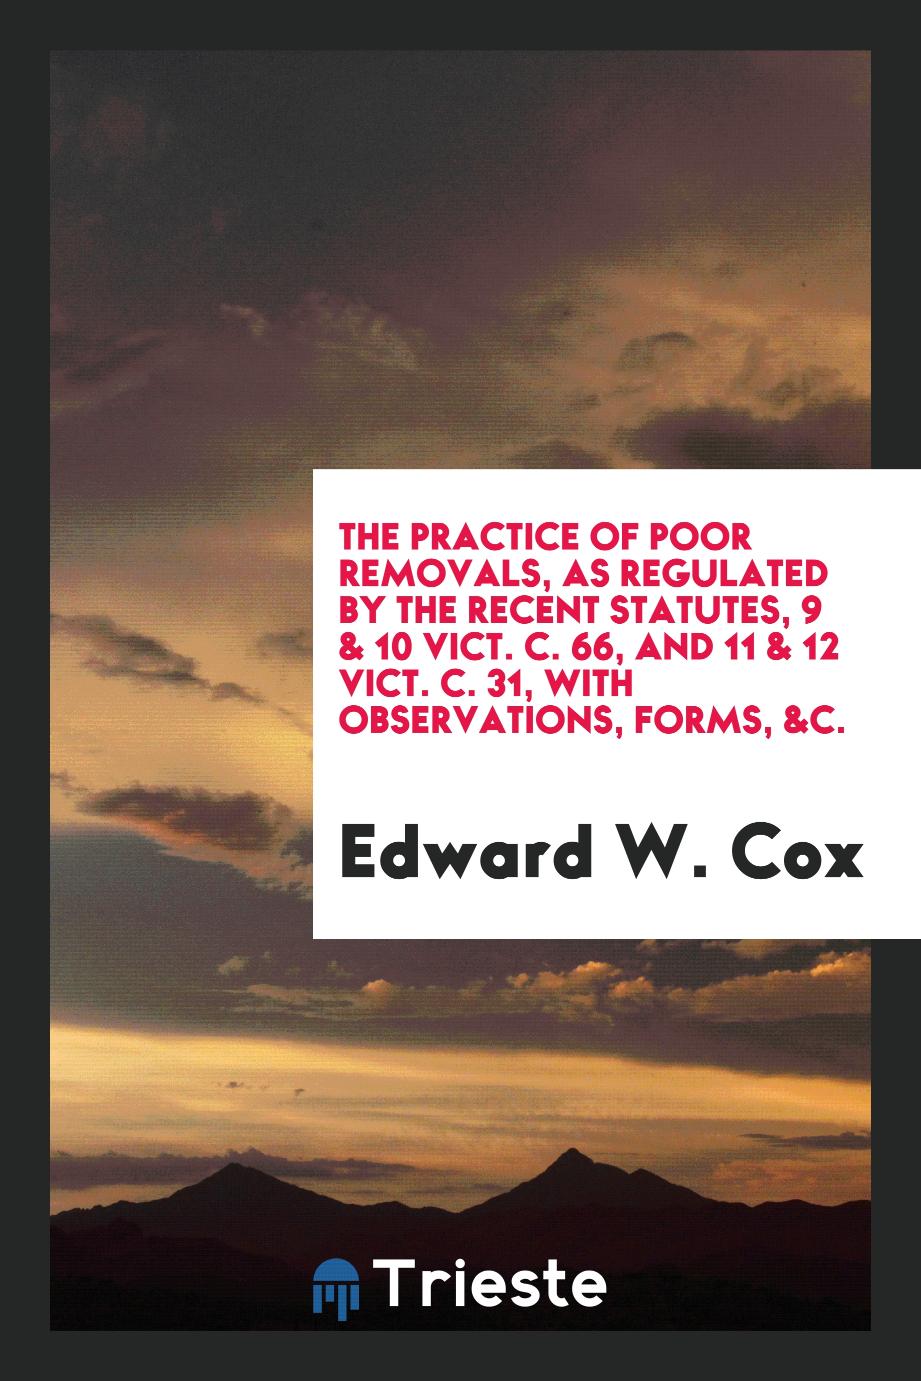 The Practice of Poor Removals, As Regulated by the Recent Statutes, 9 & 10 Vict. C. 66, and 11 & 12 Vict. C. 31, with Observations, Forms, &c.